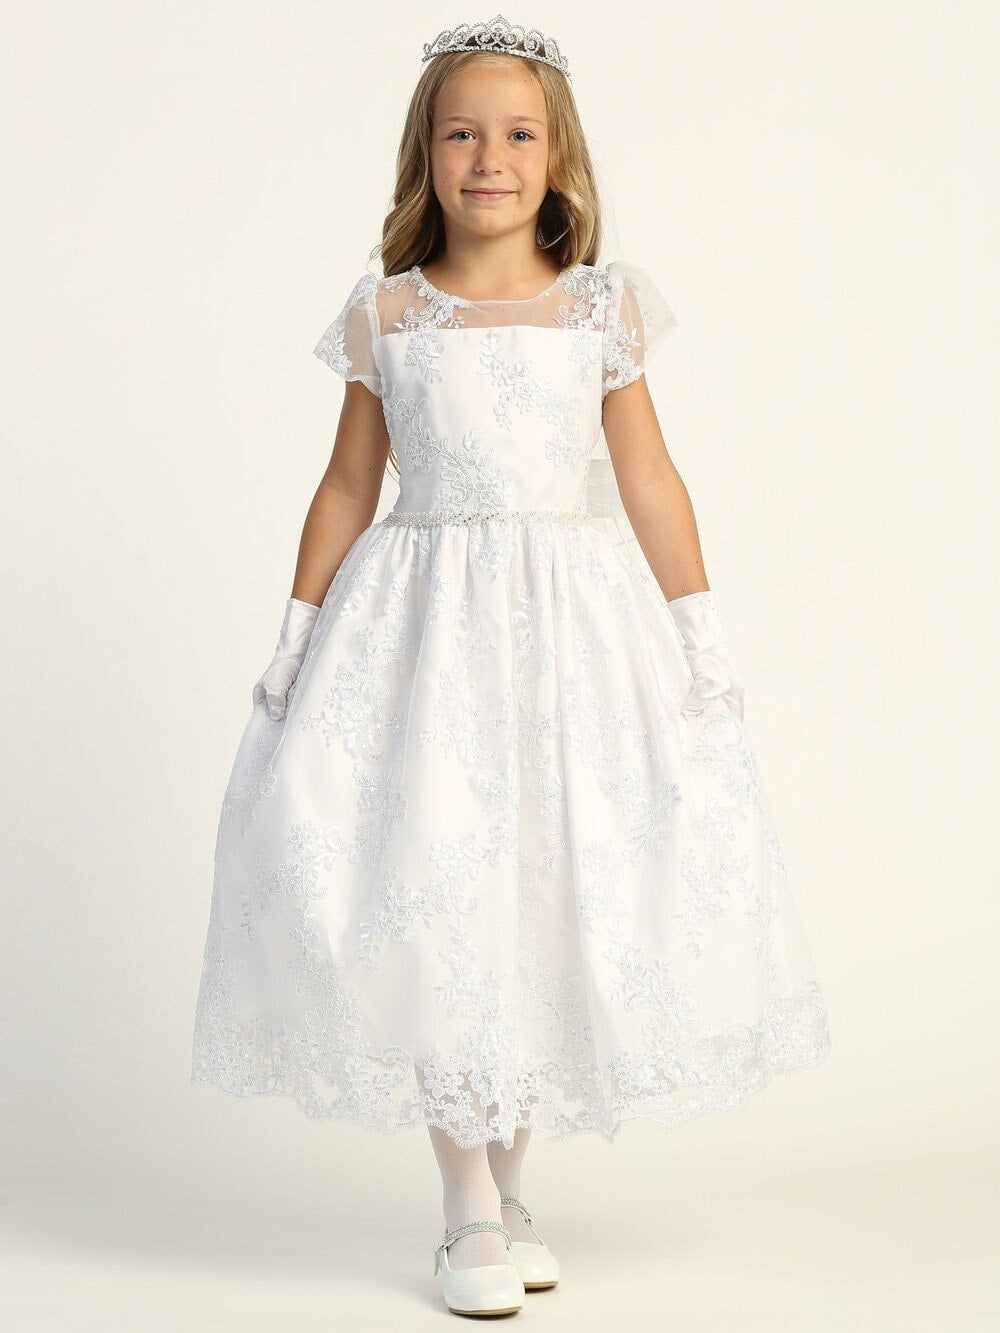 A girl wearing a stunning white First Communion Dress with embroidered tulle and sequins, featuring a soft acetate lining.